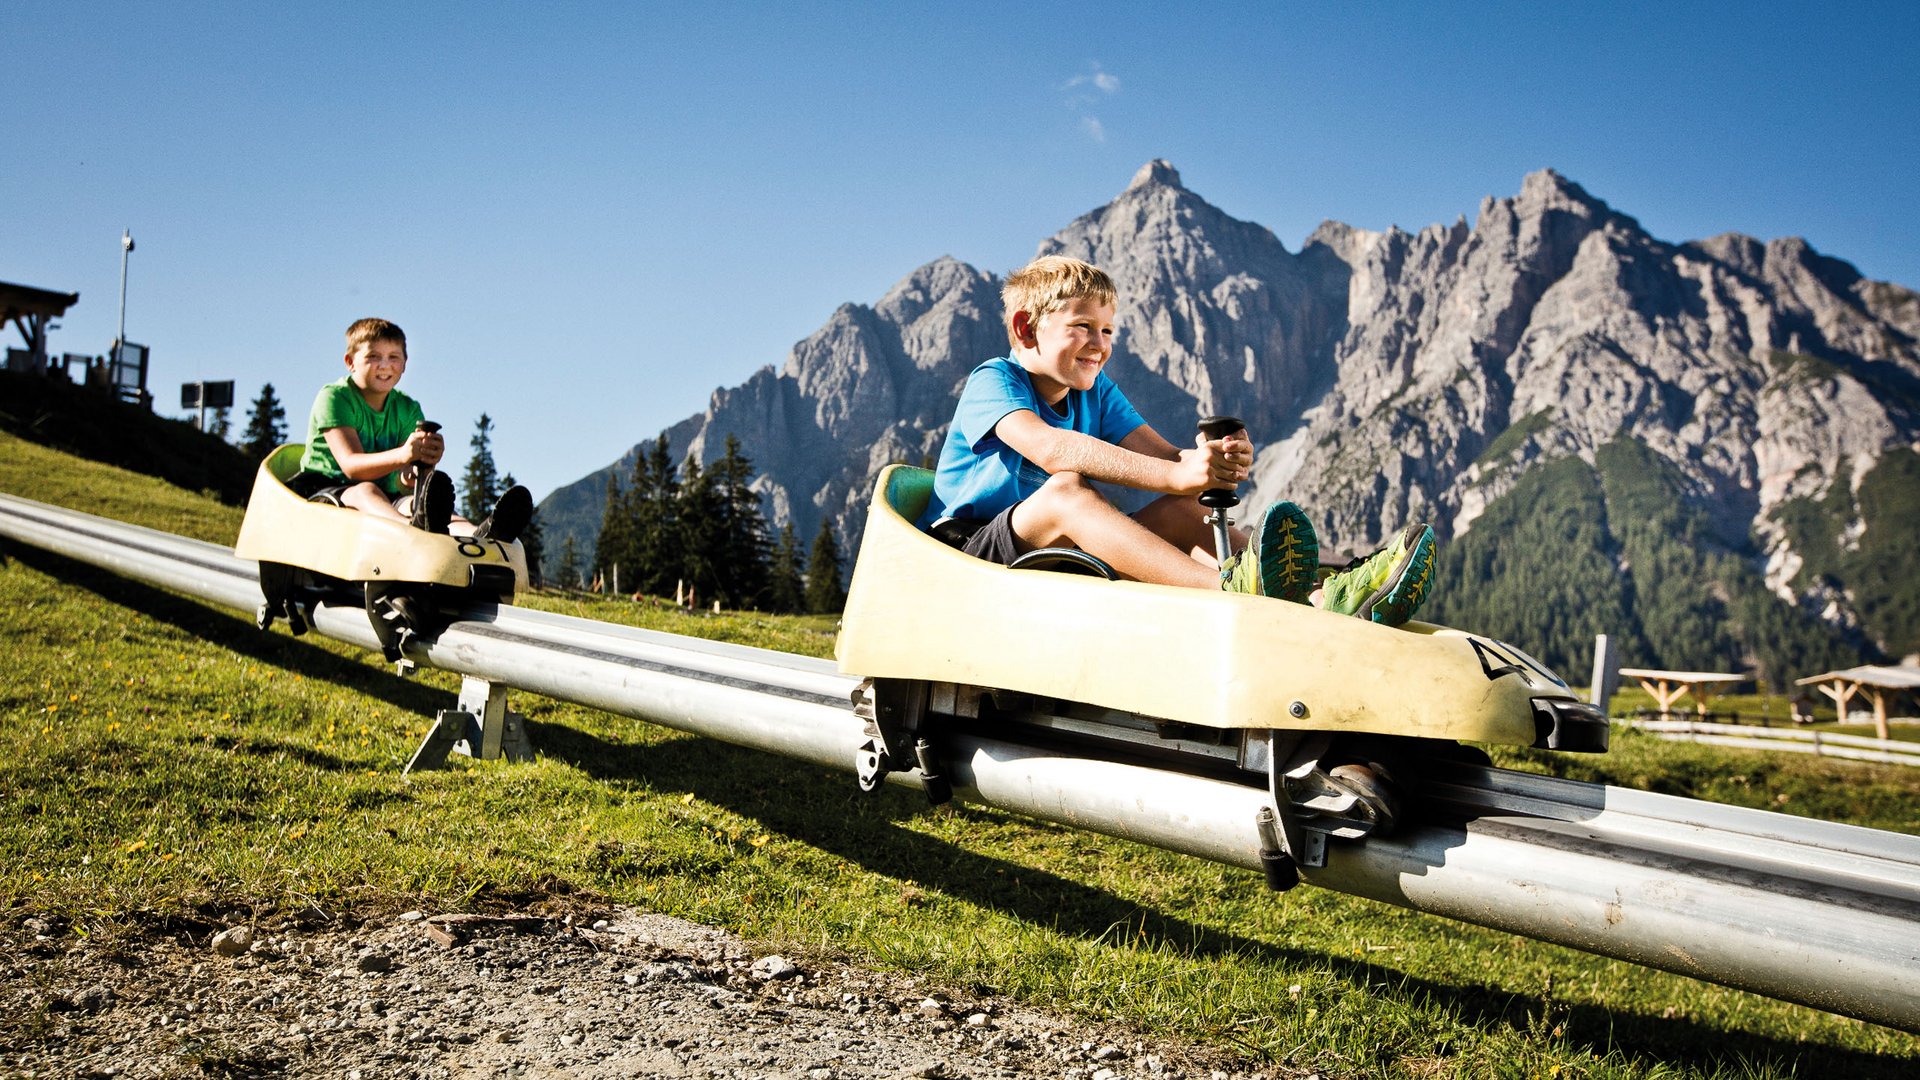 Fun and thrills around our sports hotel in Stubaital